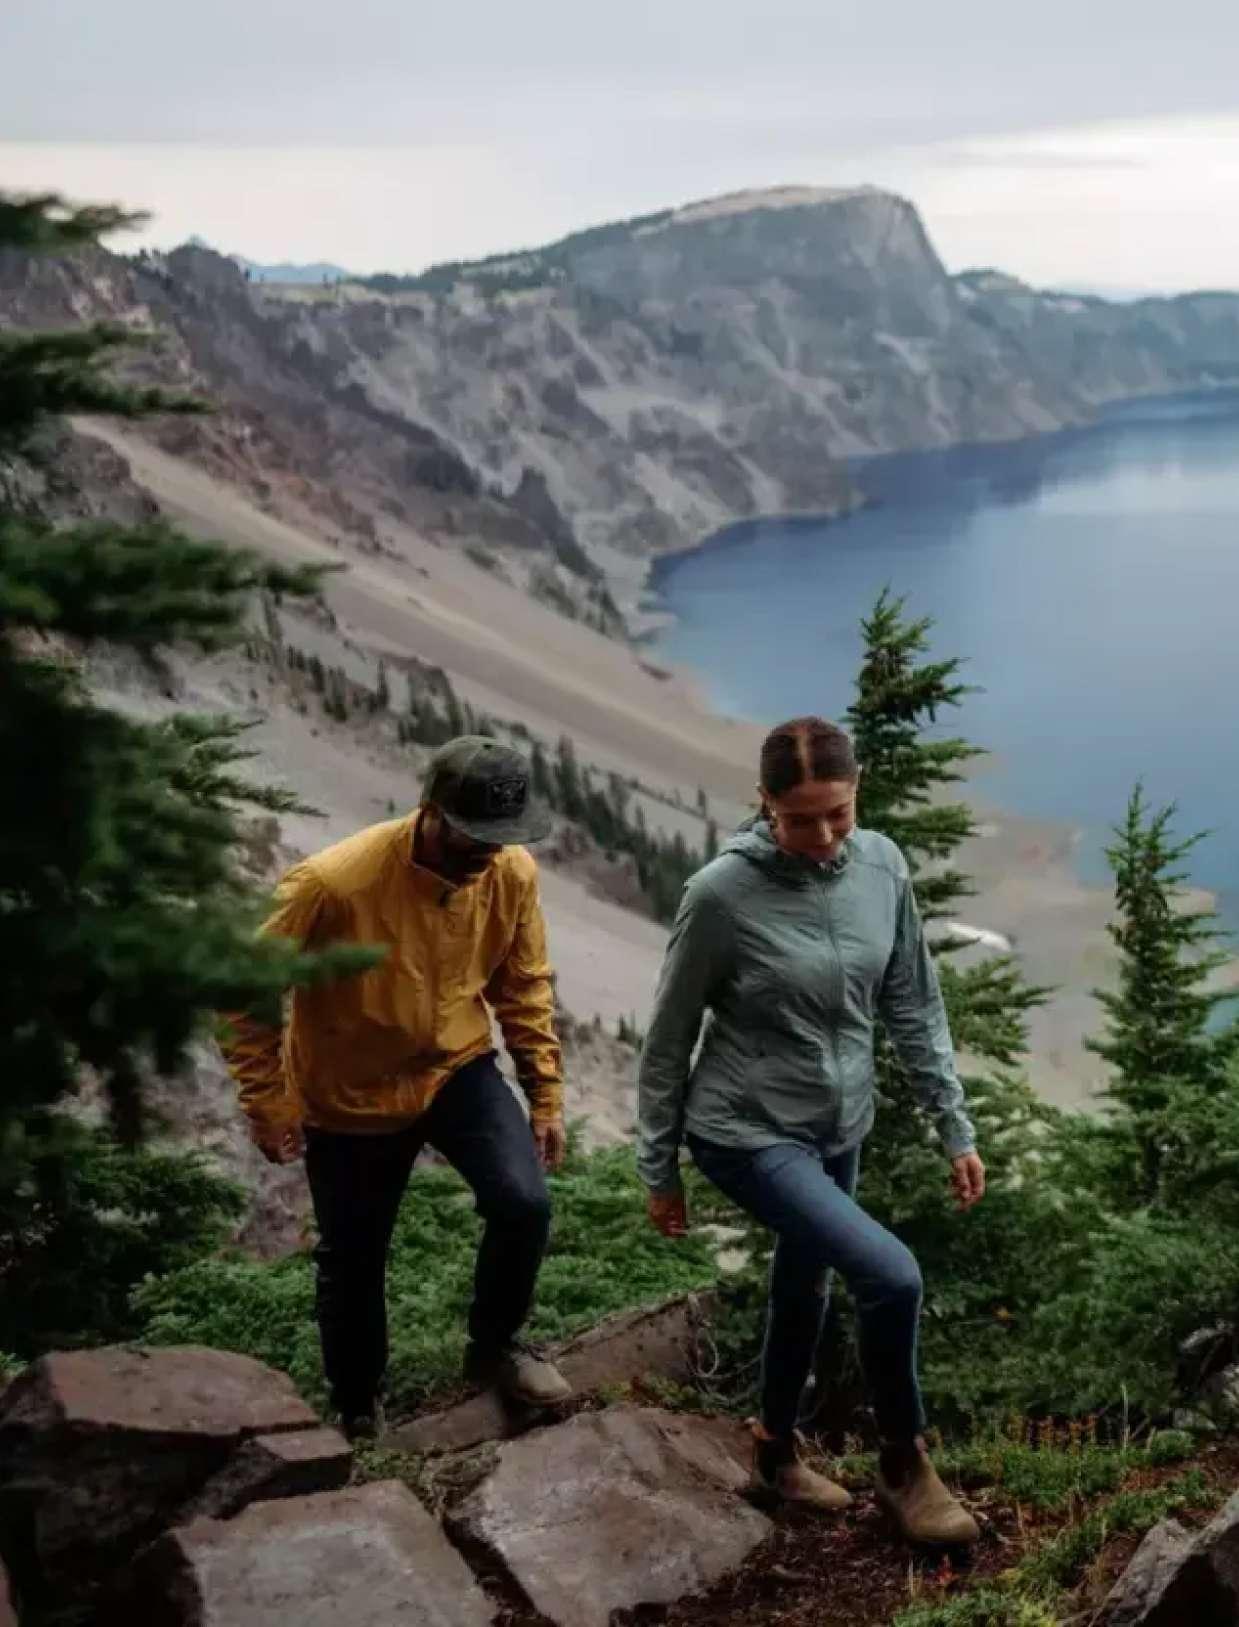 People wearing The One™ jackets with a lake in the background.